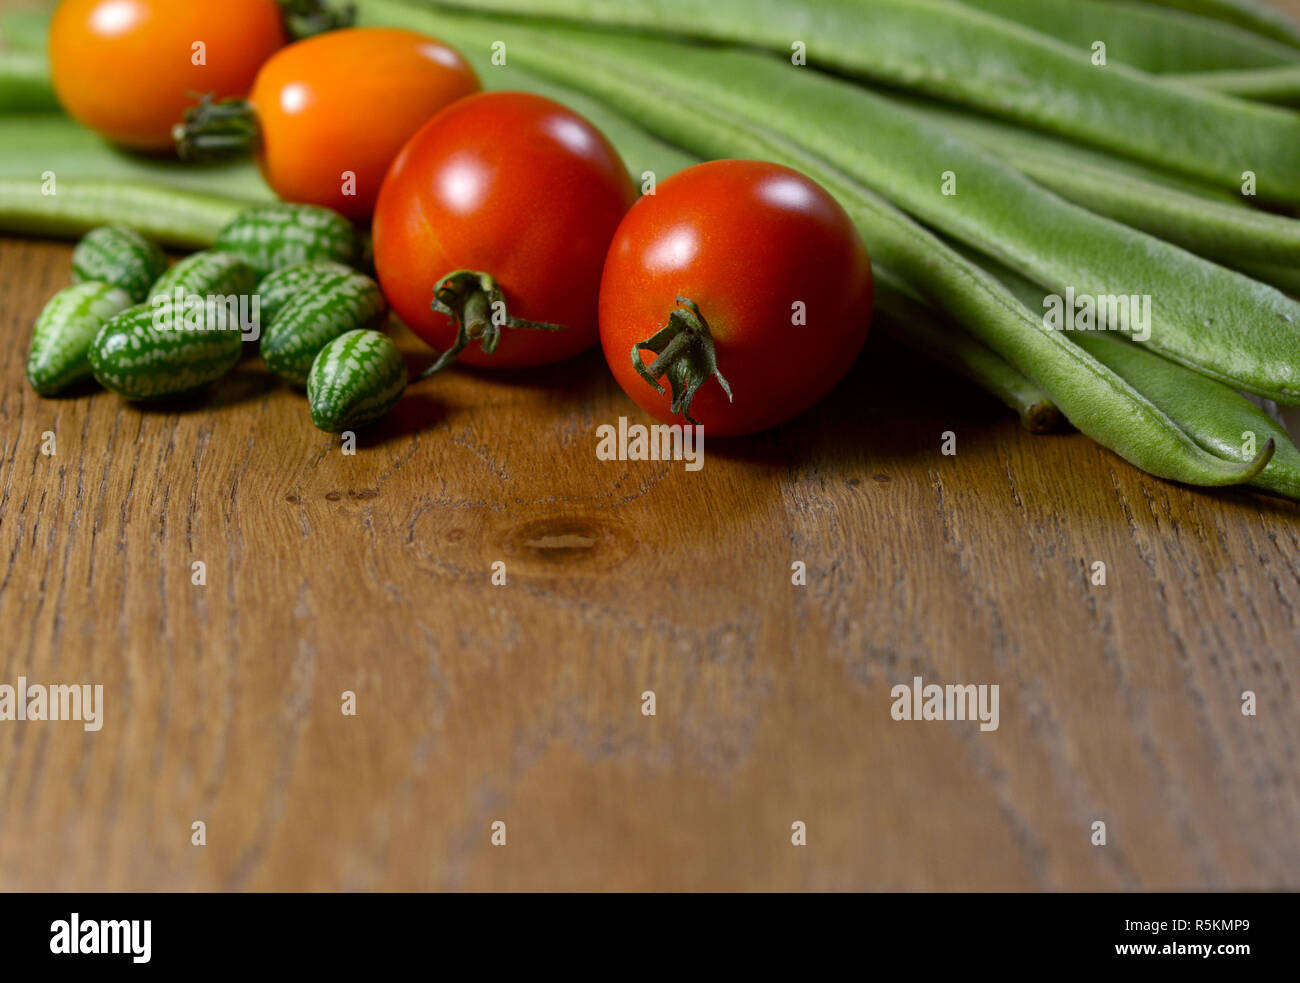 Cucamelons, orange and red tomatoes and runner beans Stock Photo